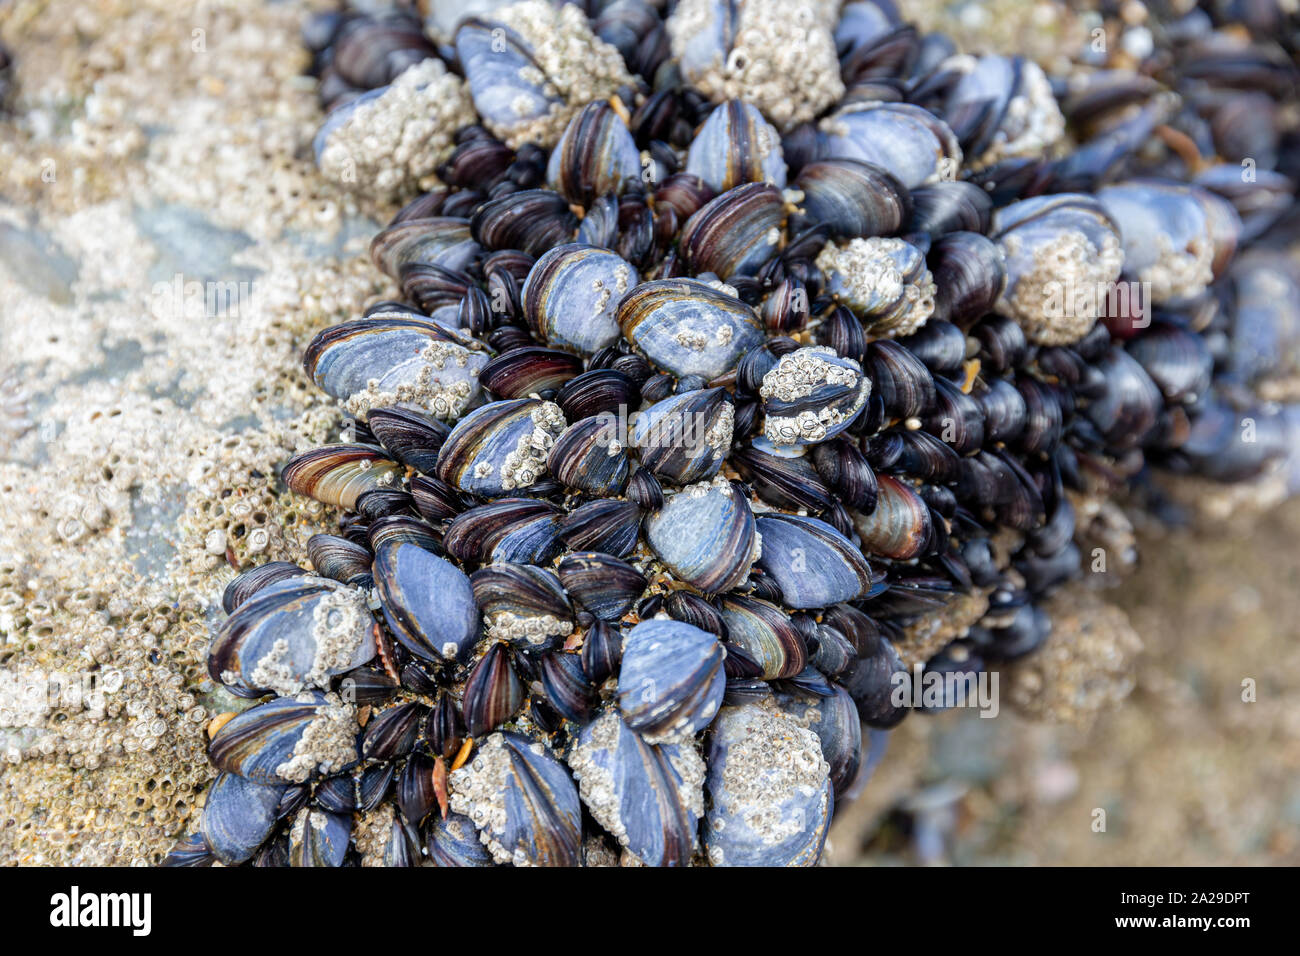 Wild blue mussels, Mytilus edulis, growing on the rocks in the intertidal zone in Cornwall, UK Stock Photo